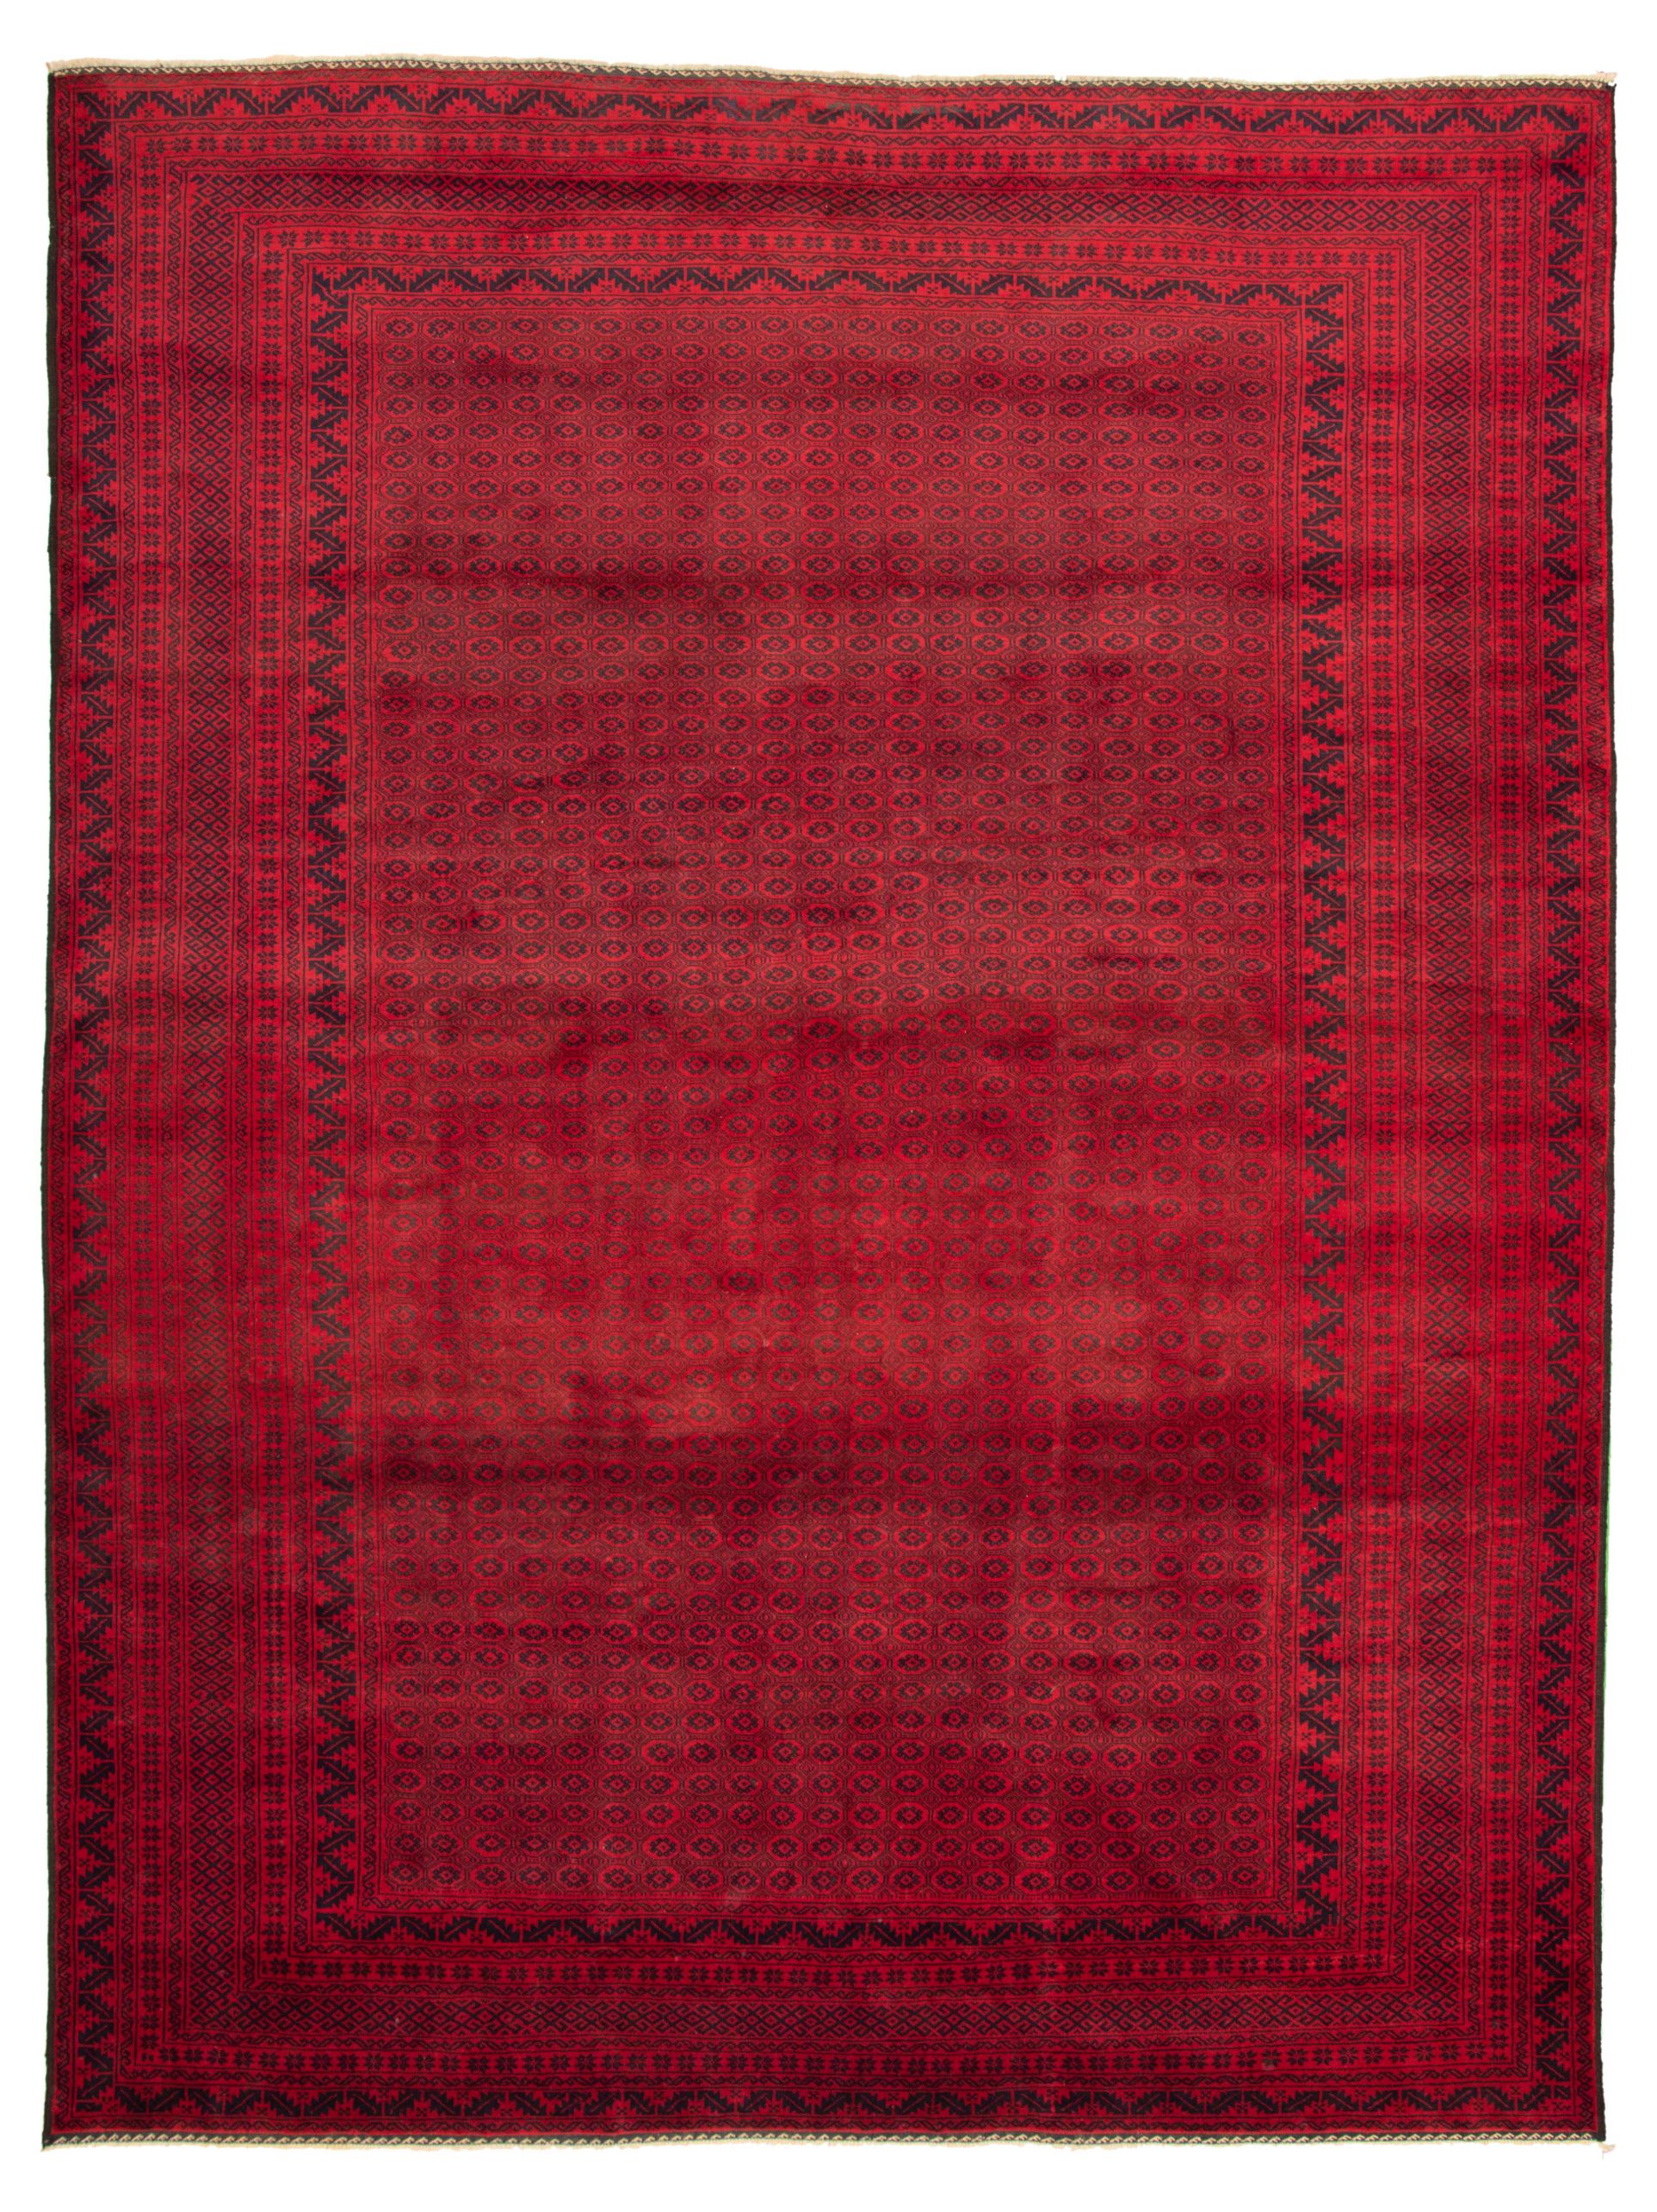 Hand-knotted Teimani Red Wool Rug 9'8" x 12'5" Size: 9'8" x 12'5"  